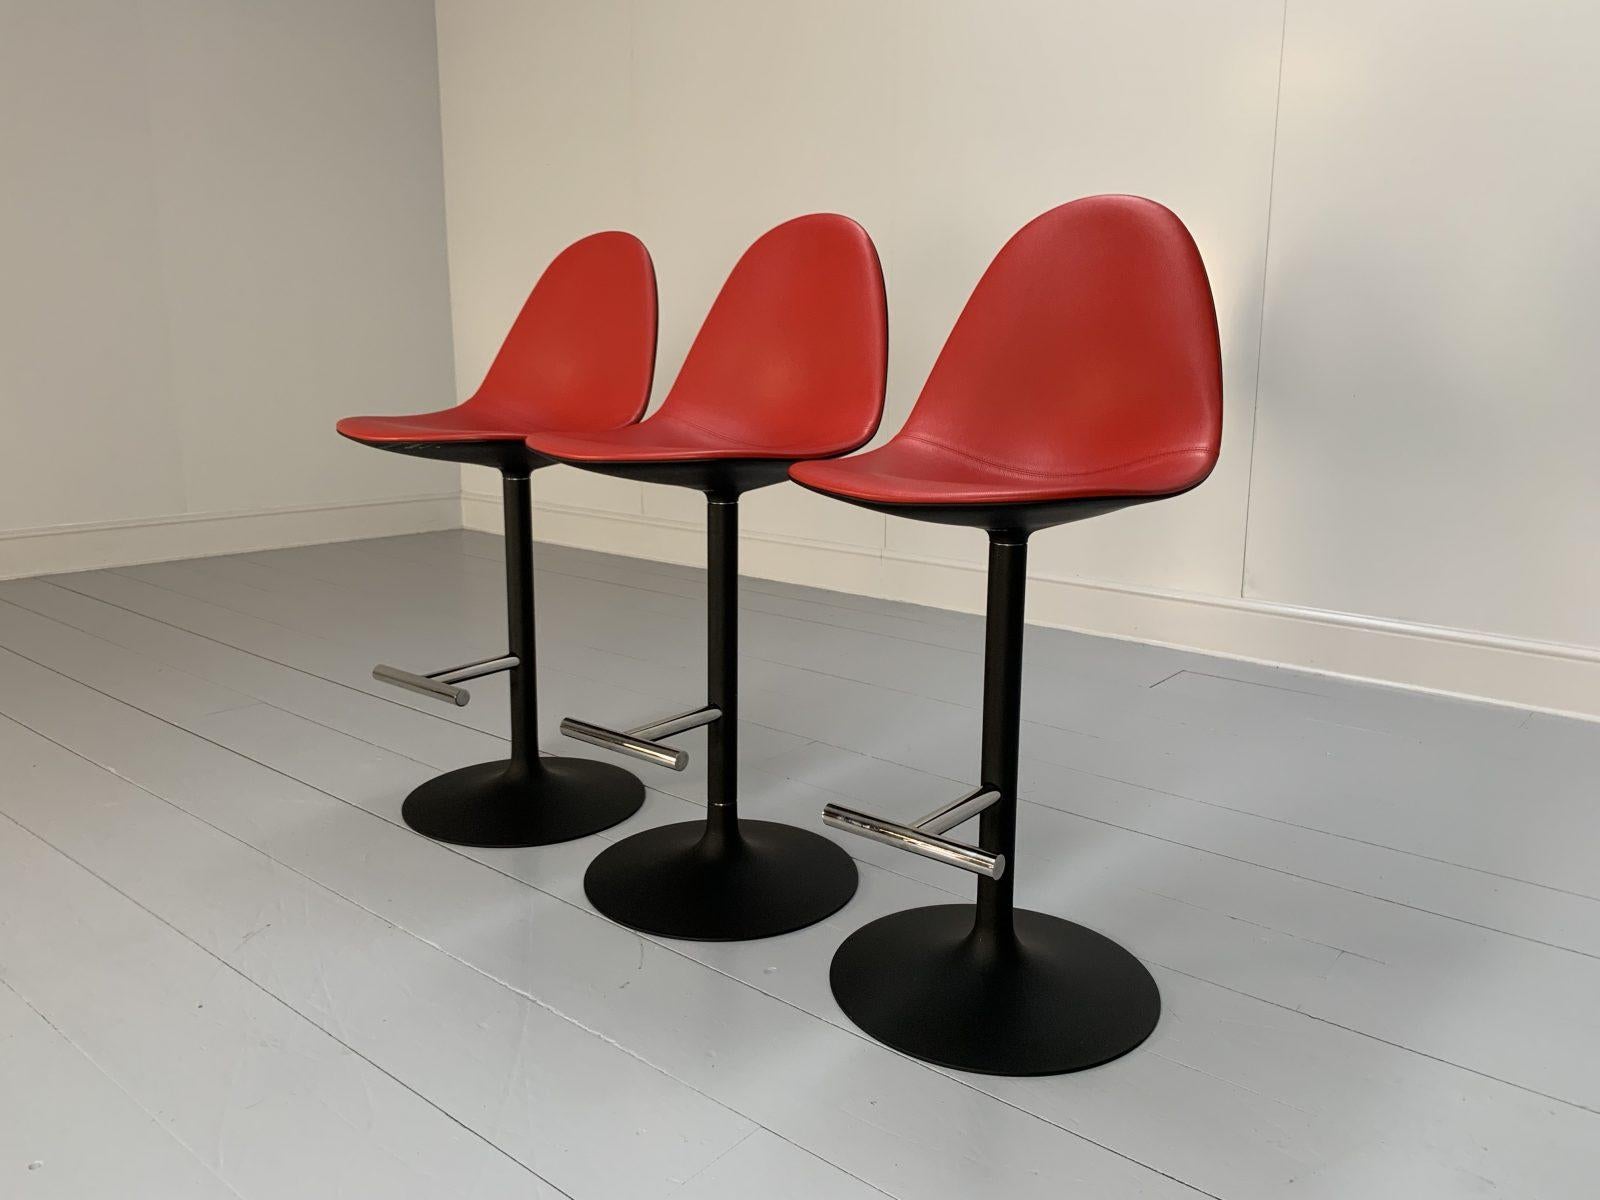 This is an ultra-rare opportunity to acquire what is, unequivocally, the best of the best, it being a most elegant suite of 3 identical Cassina “248 Passion” Bar Stools, dressed in a beautiful, high-grade “Pelle” leather in Red.
 
In a world of